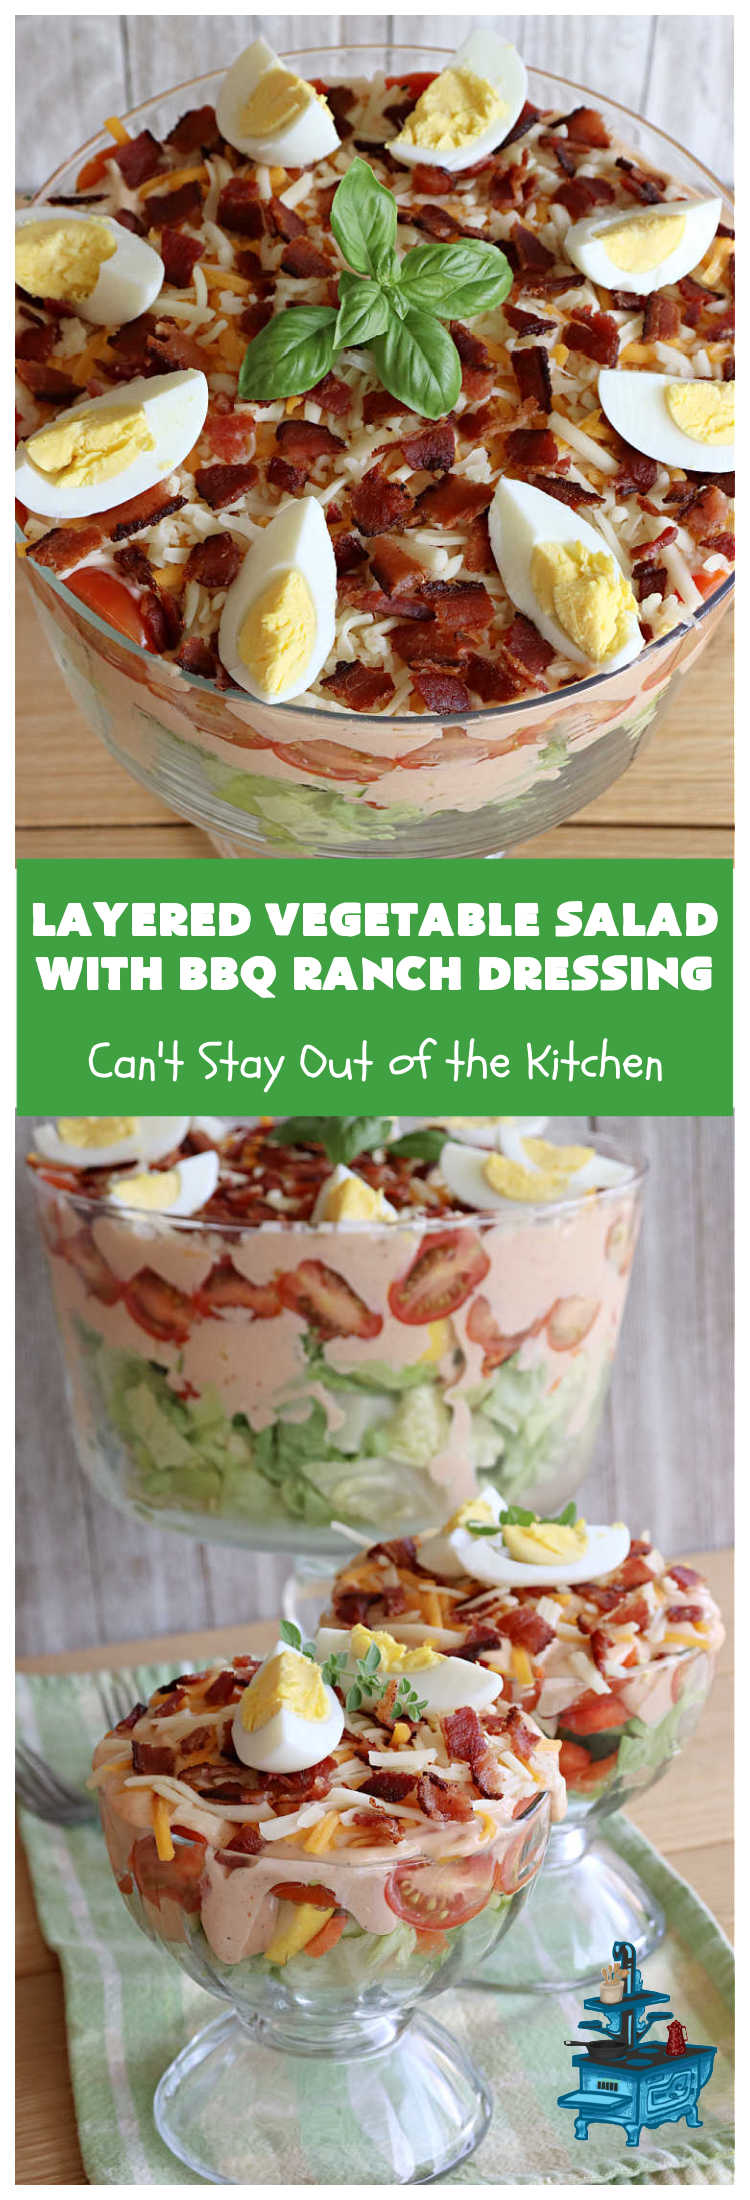 Layered Vegetable Salad with BBQ Ranch Dressing | Can't Stay Out of the Kitchen